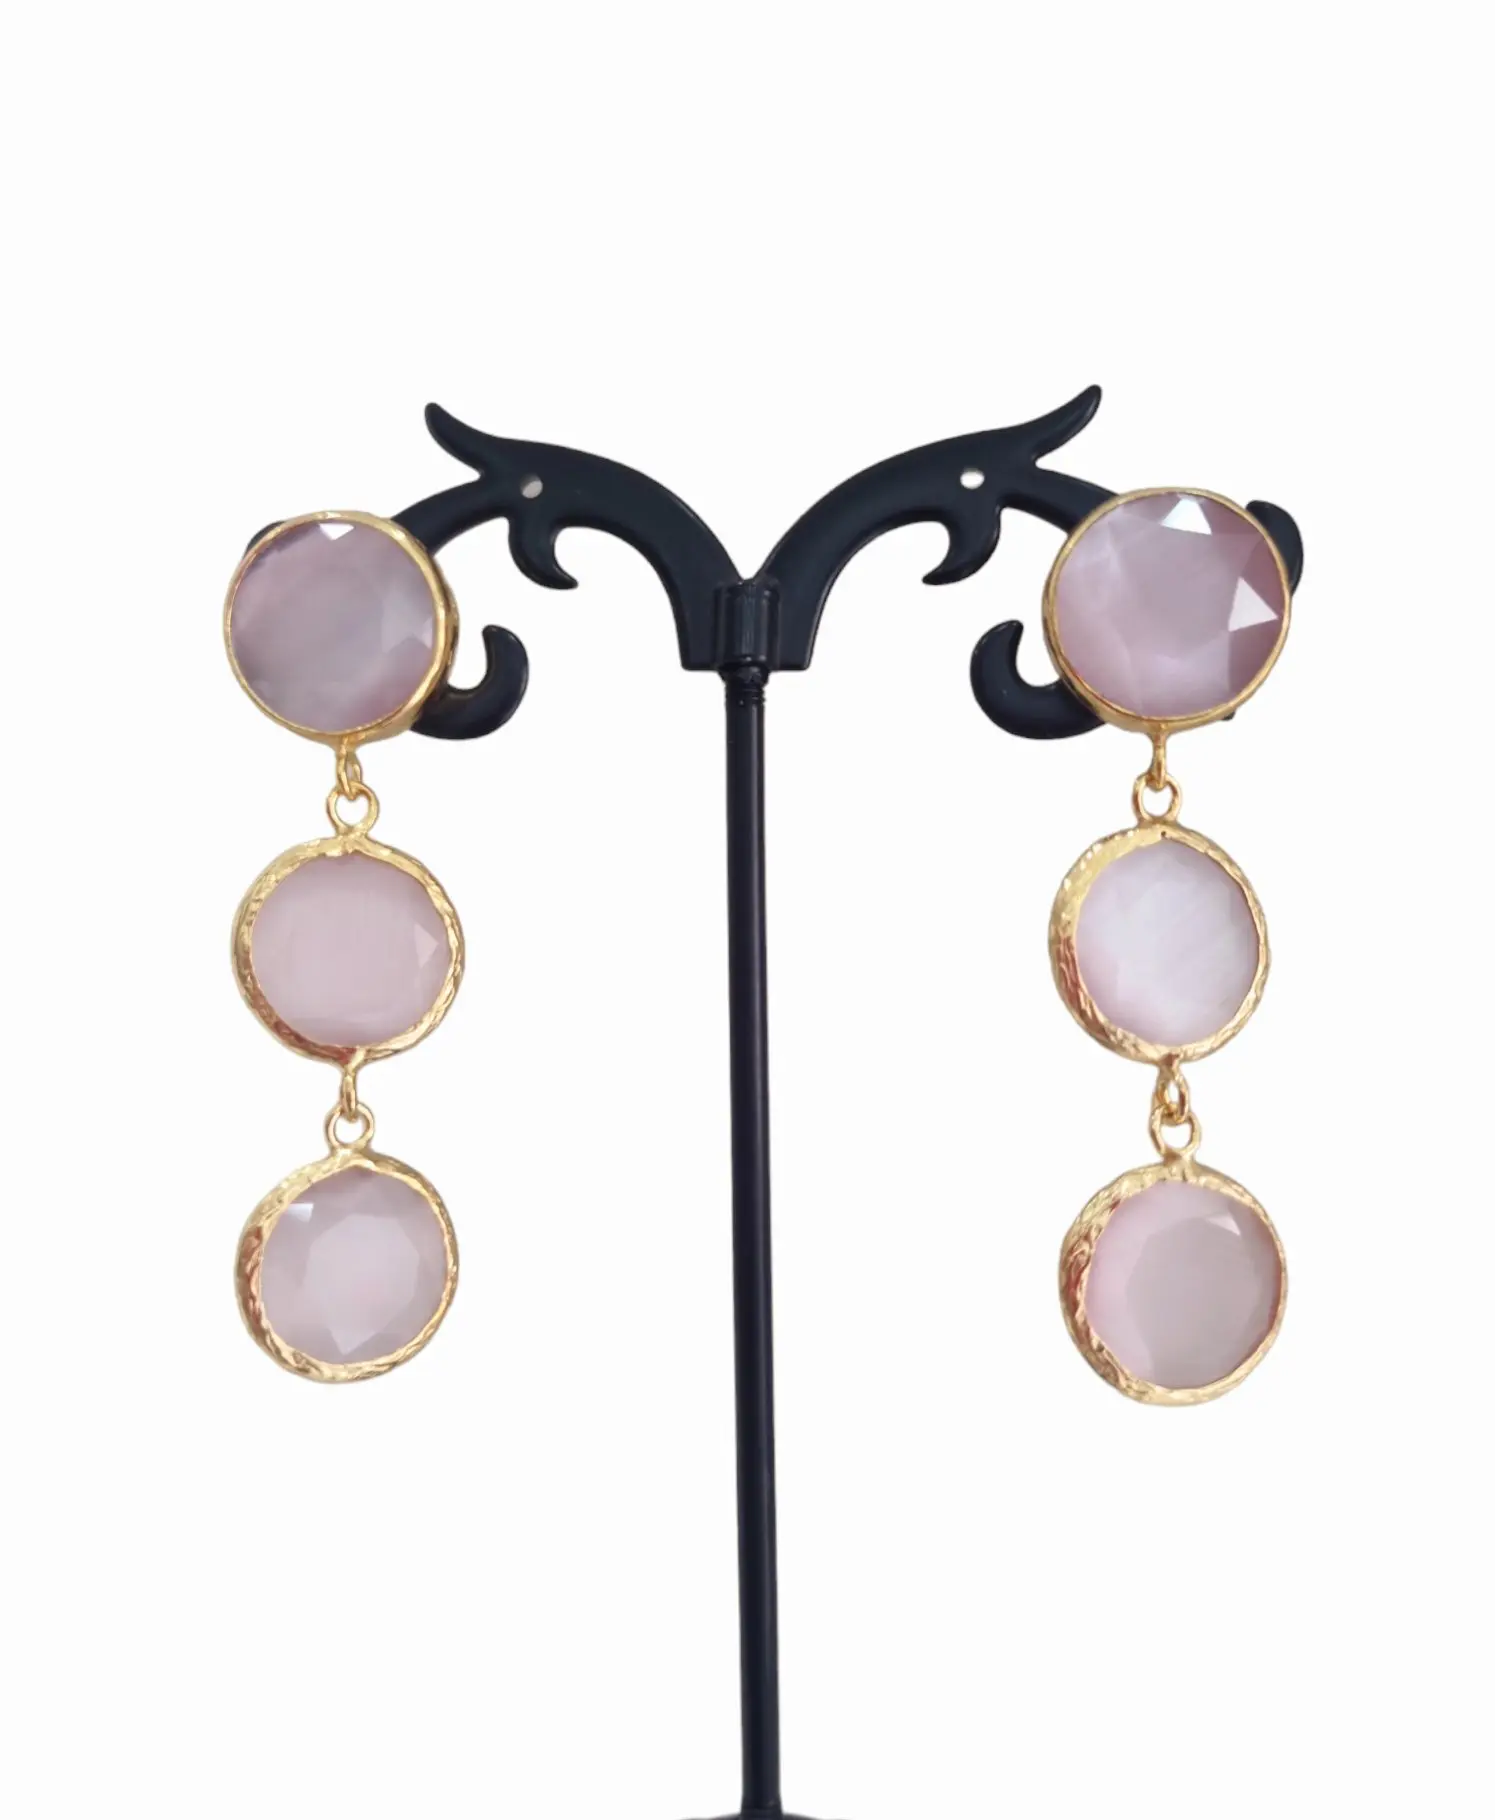 Earrings made with cat's eye surrounded by brass. Powder pink color Length 5cm Weight 6.2gr